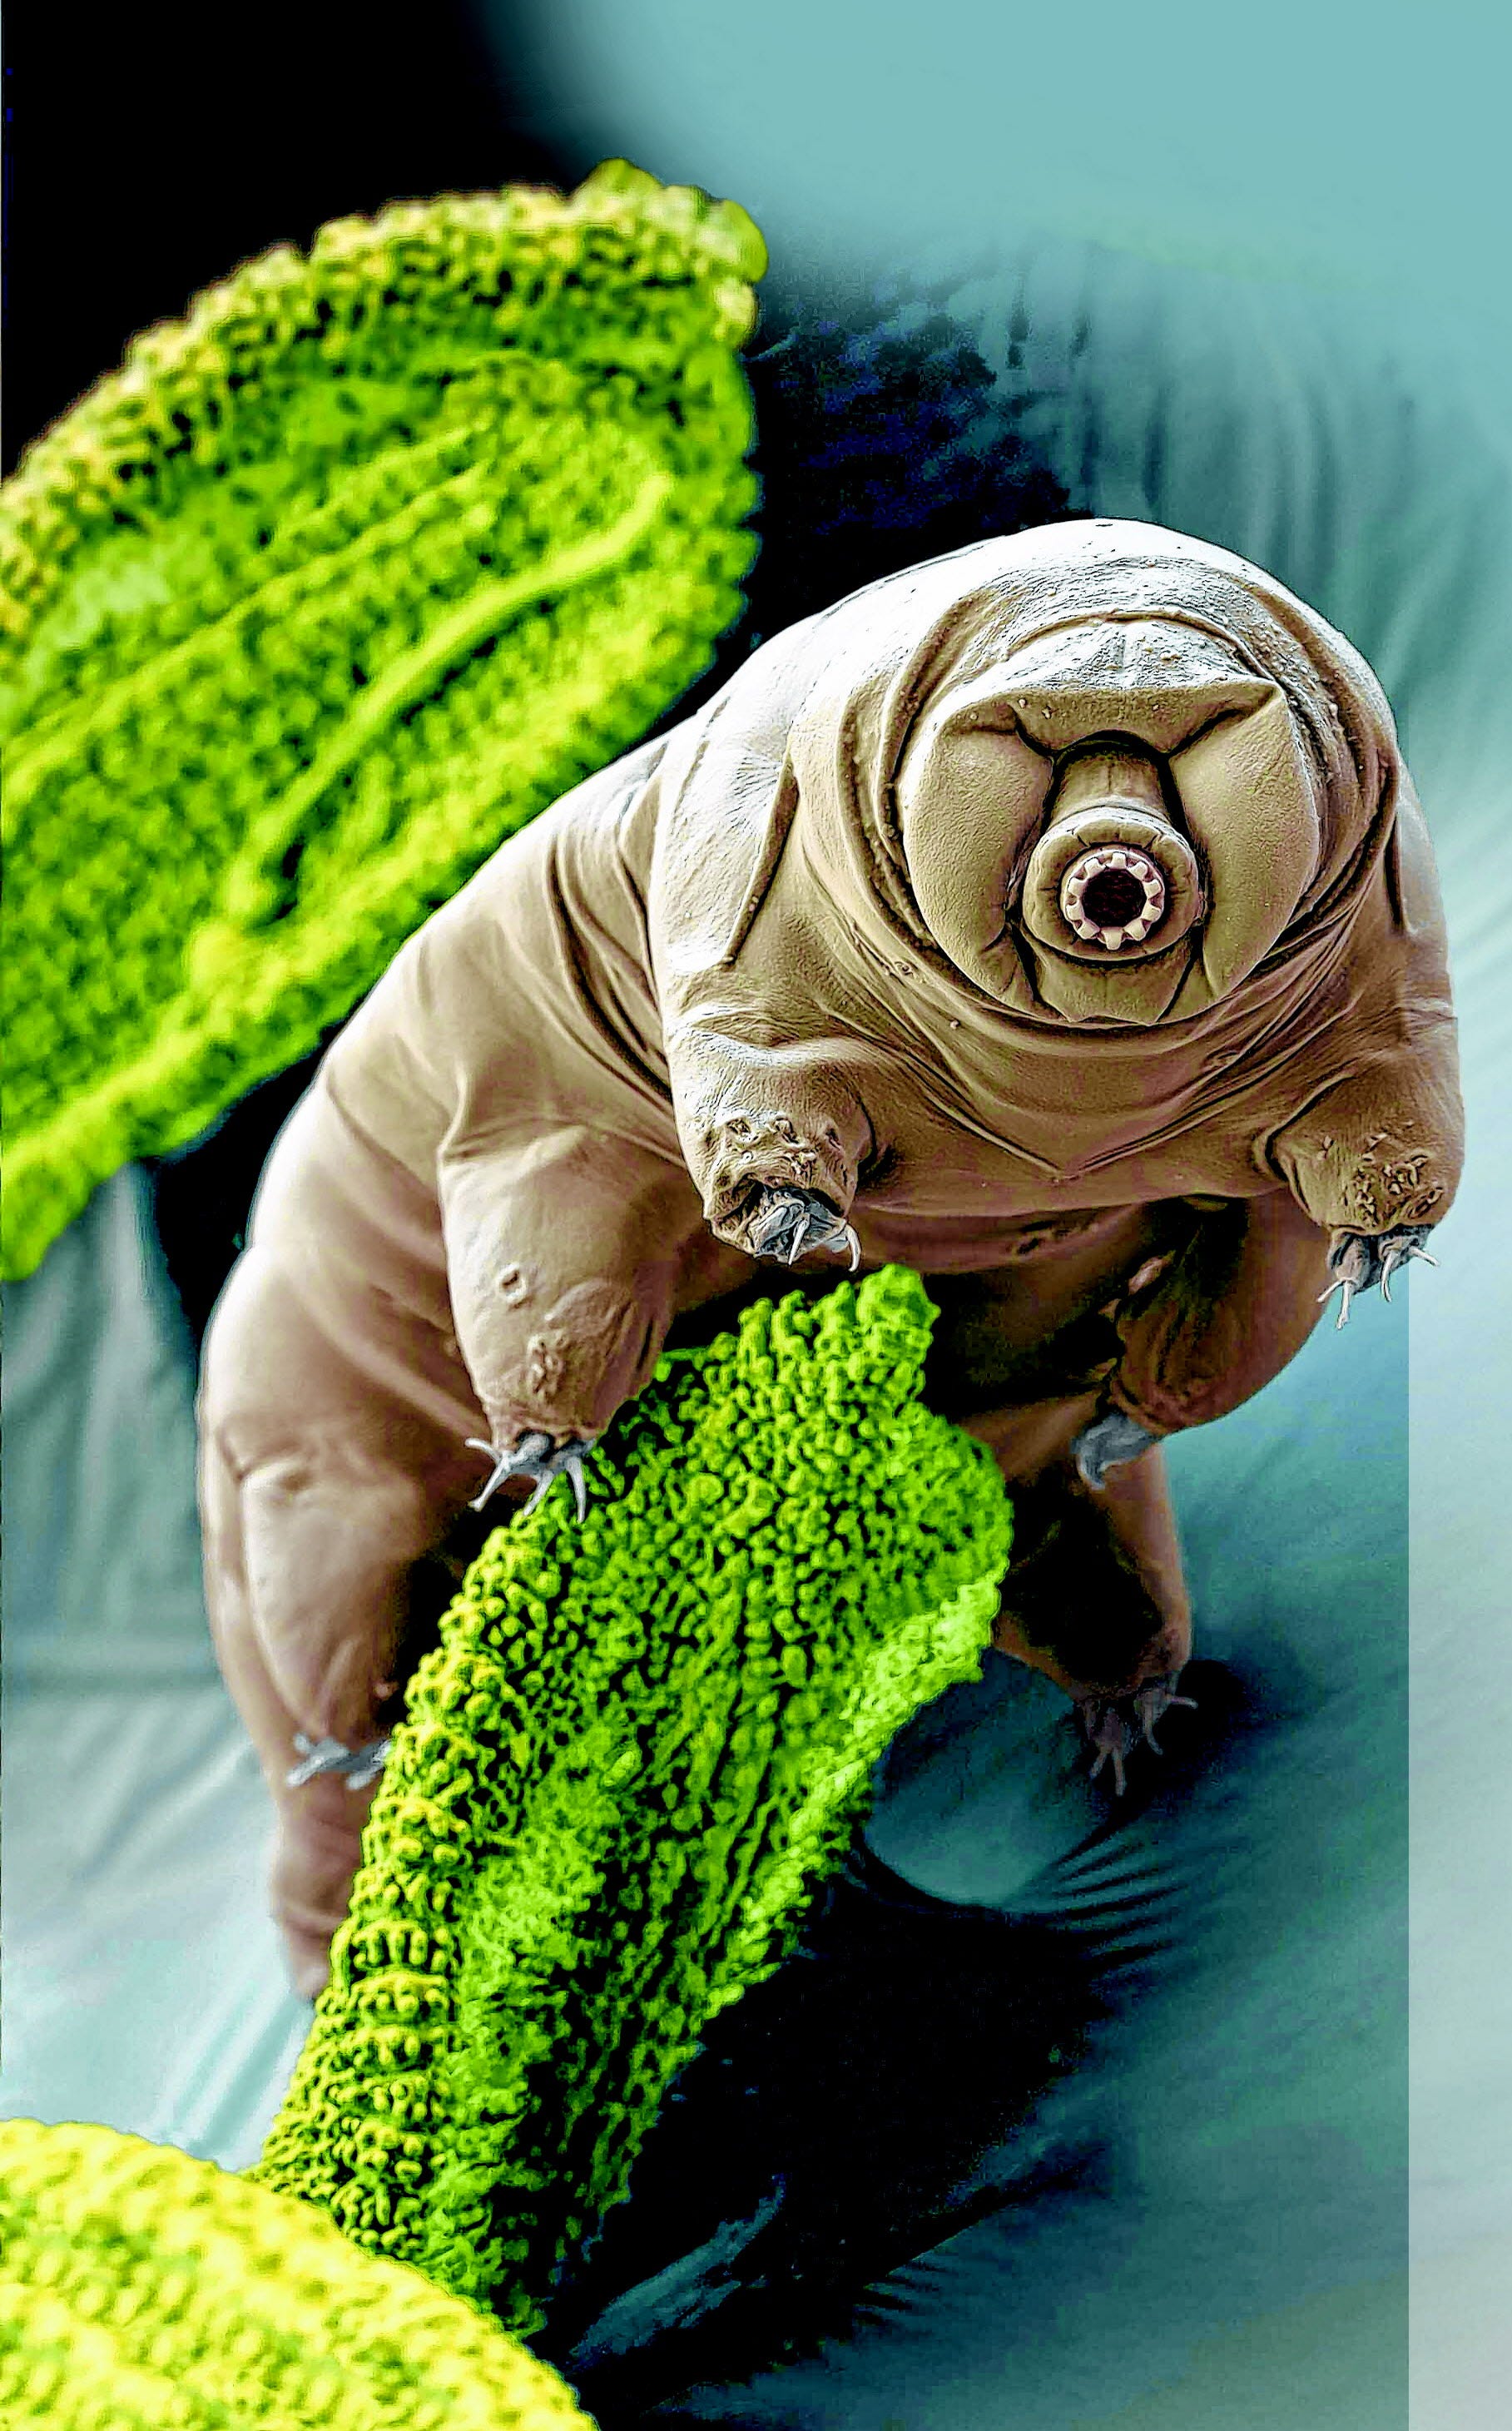 A tardigrade, or water bear, shown through an electron microscope, with color enhancement.